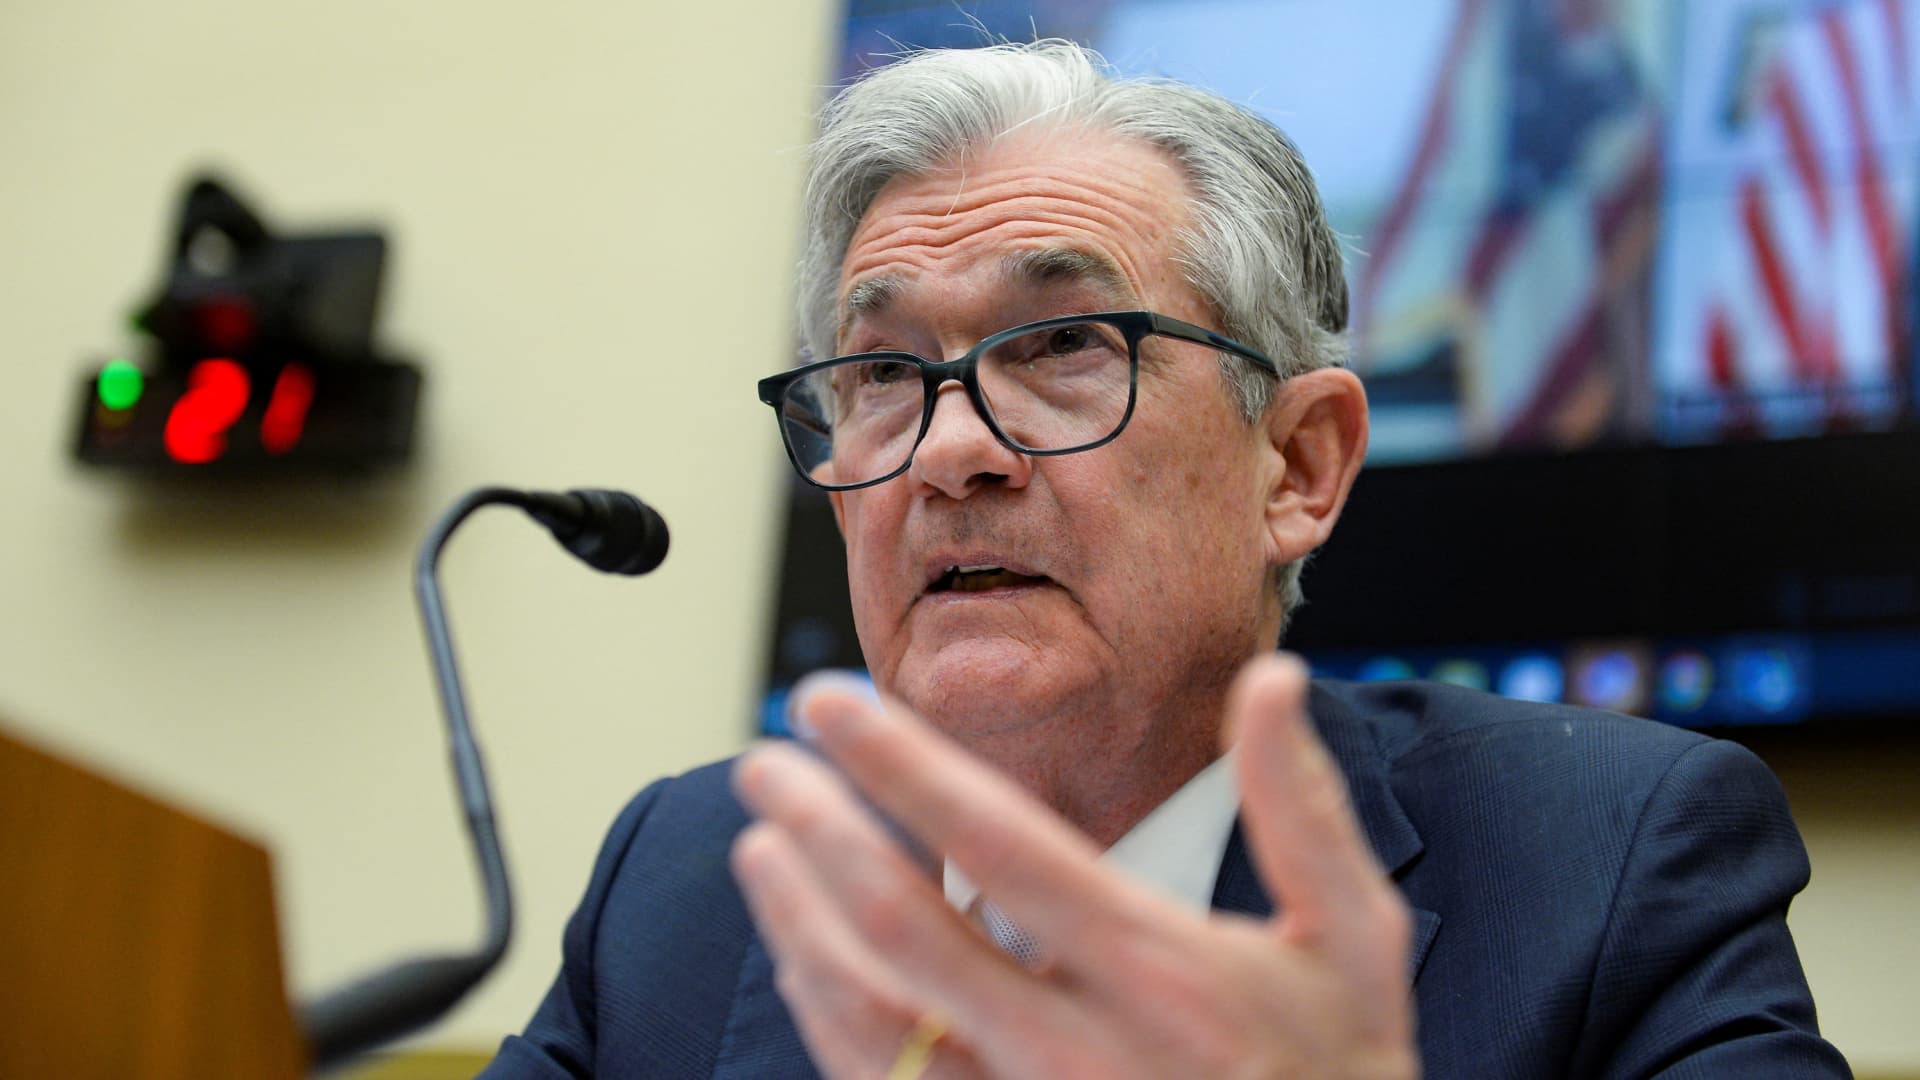 Raising interest rates is the wrong solution to the inflation problem, analyst says